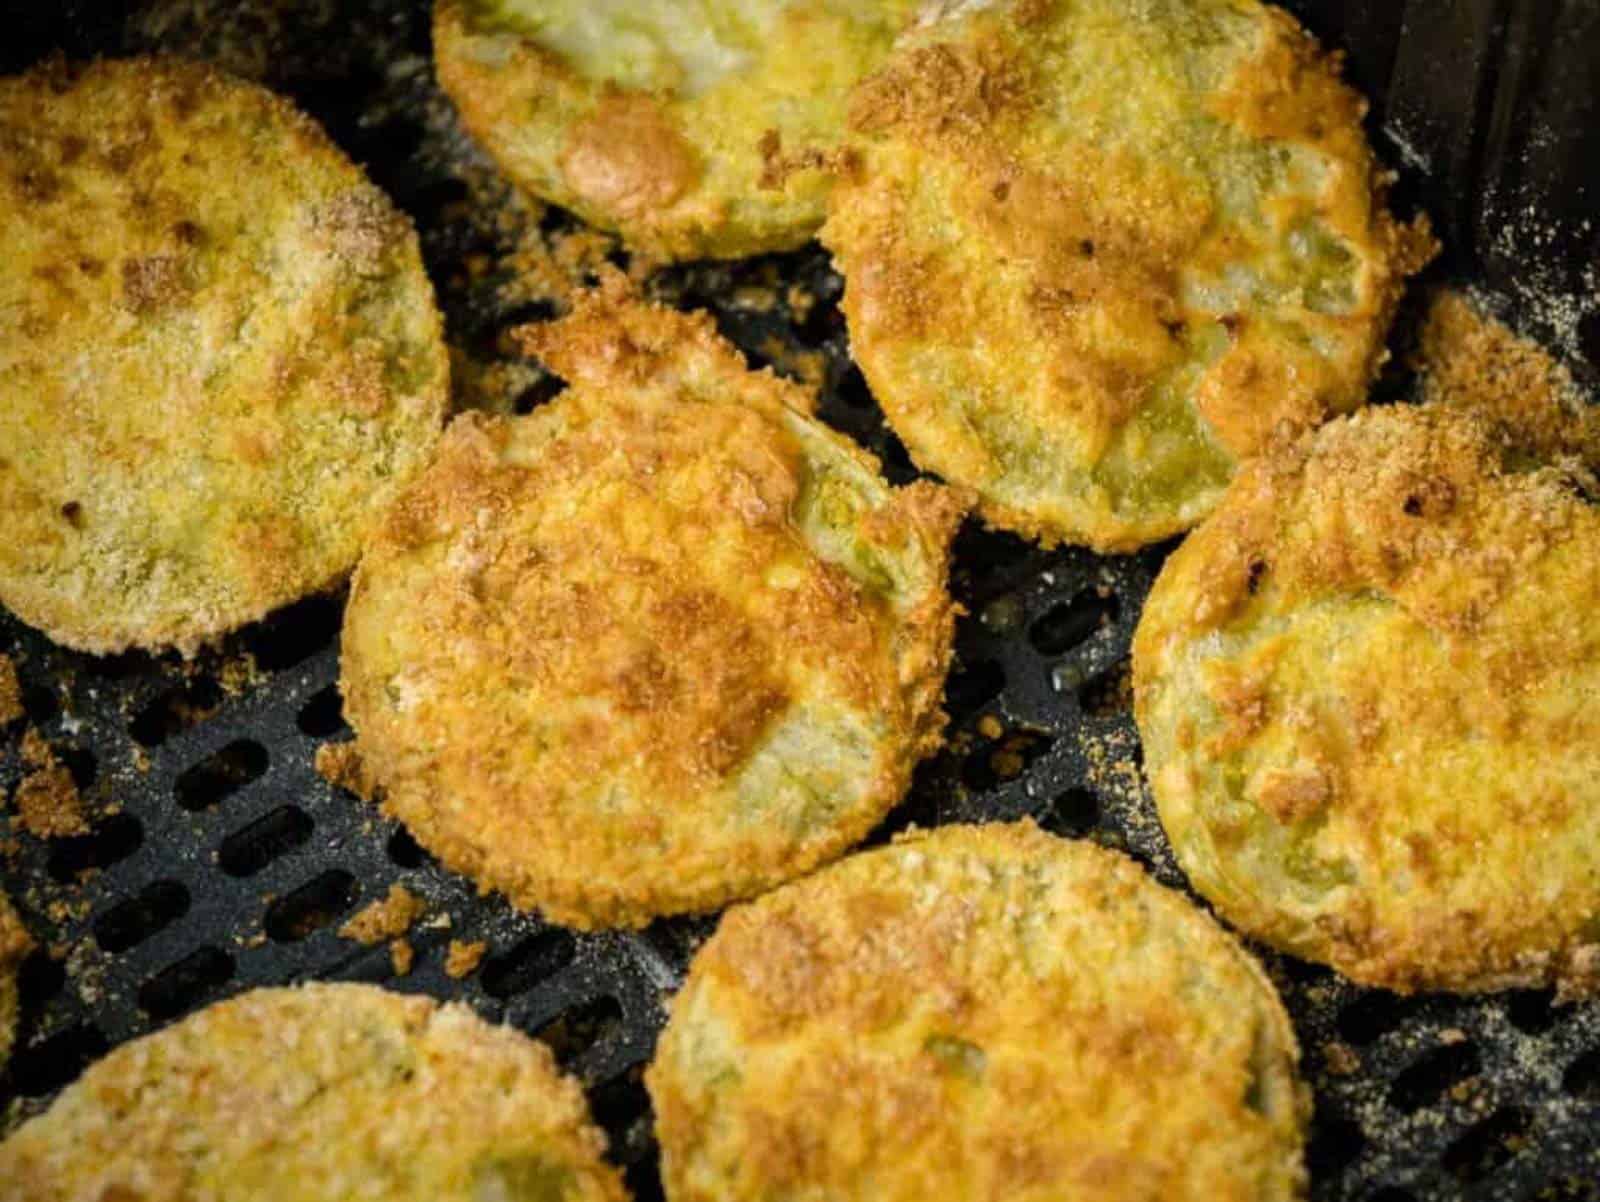 Fried green tomatoes in an air fryer basket.